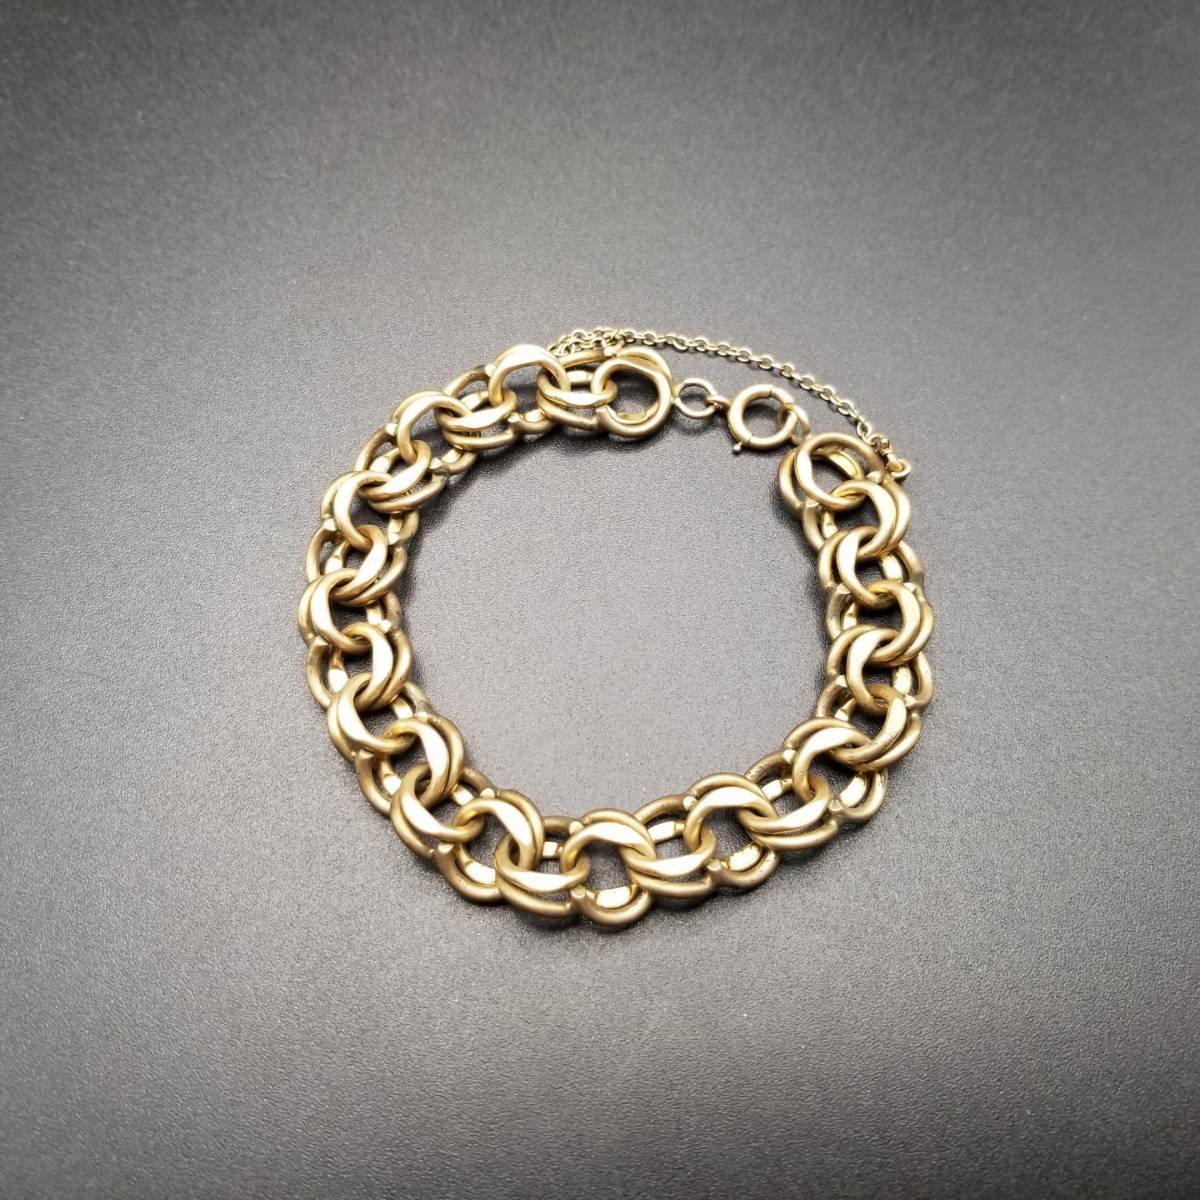 K12 gold trim double link chain Vintage bracele 23.5g standard jewelry casual from formal till 10Y-F